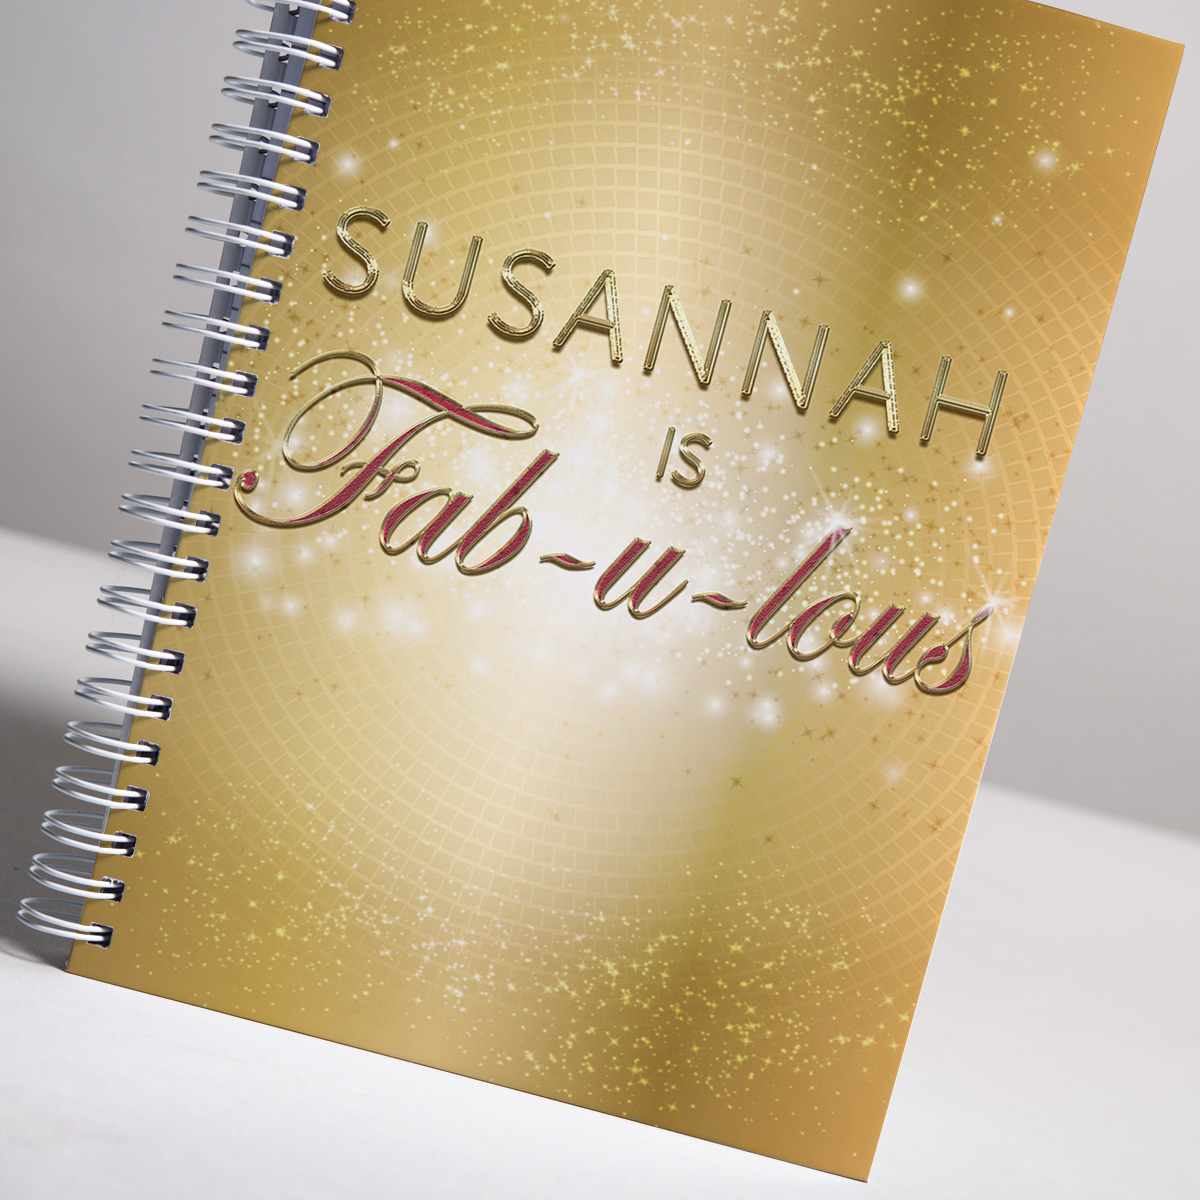 Personalised Notebook - Strictly Fab U Lous